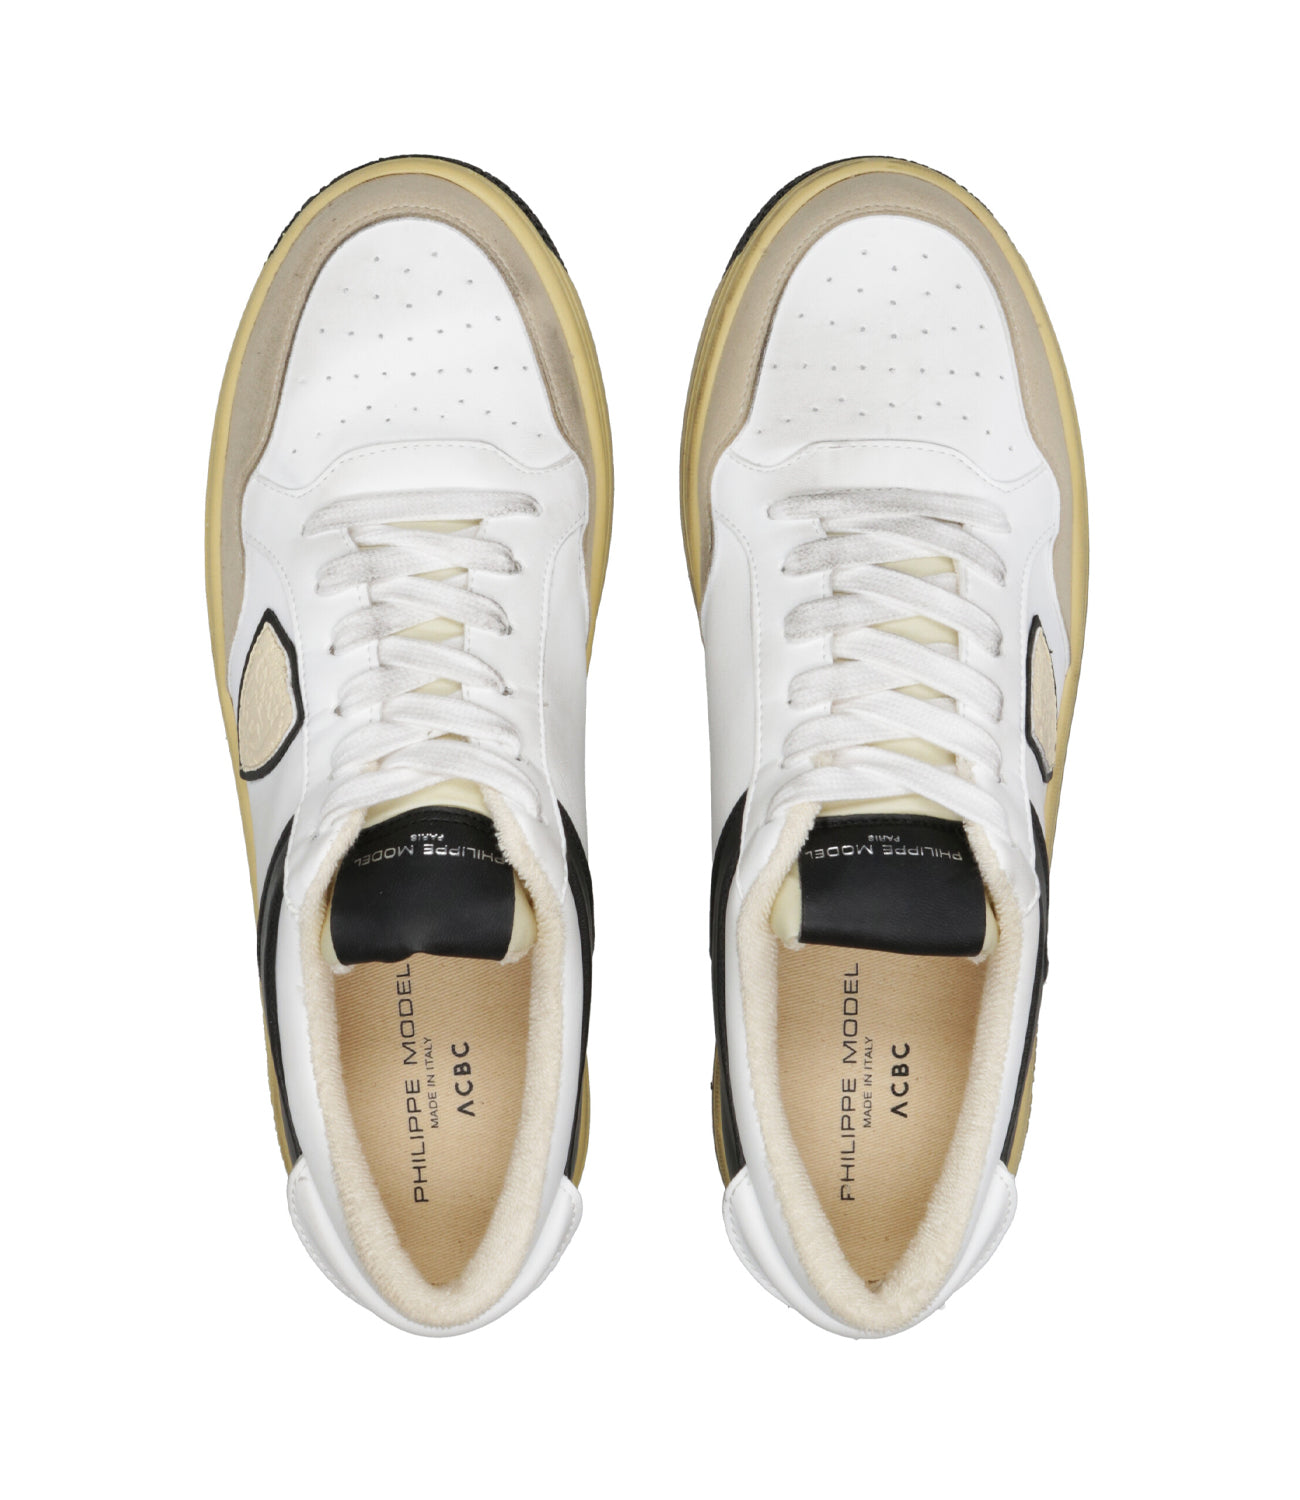 Philippe Model | Sneakers Lyon Low Man Black and White